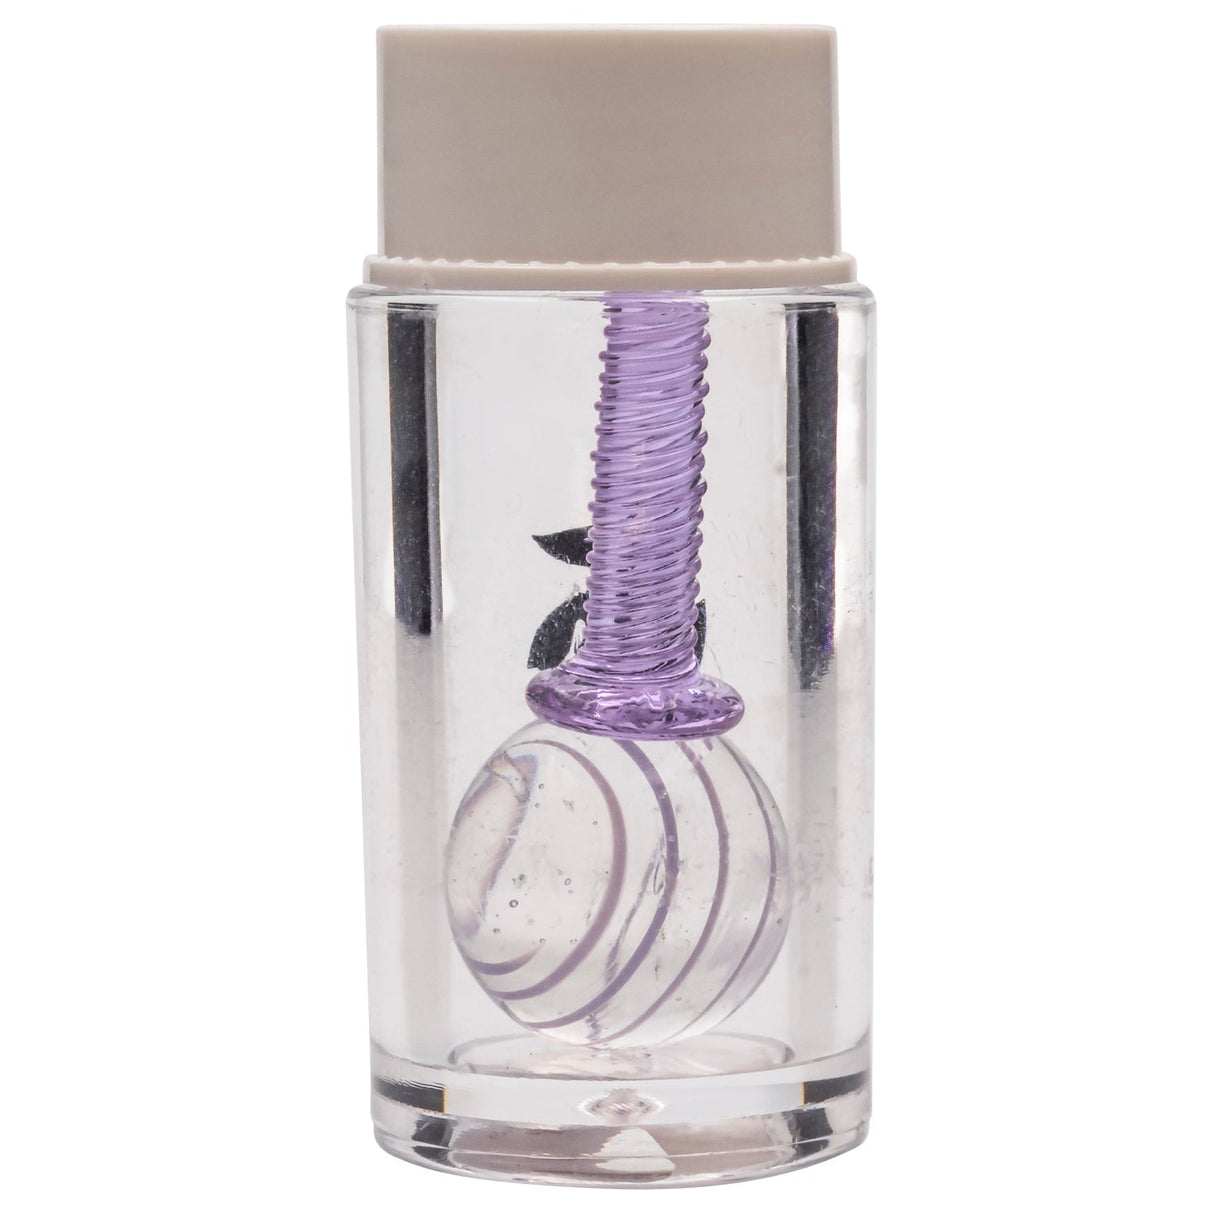 Glasshouse Purple Terp Kit front view, borosilicate glass carb cap with purple accents